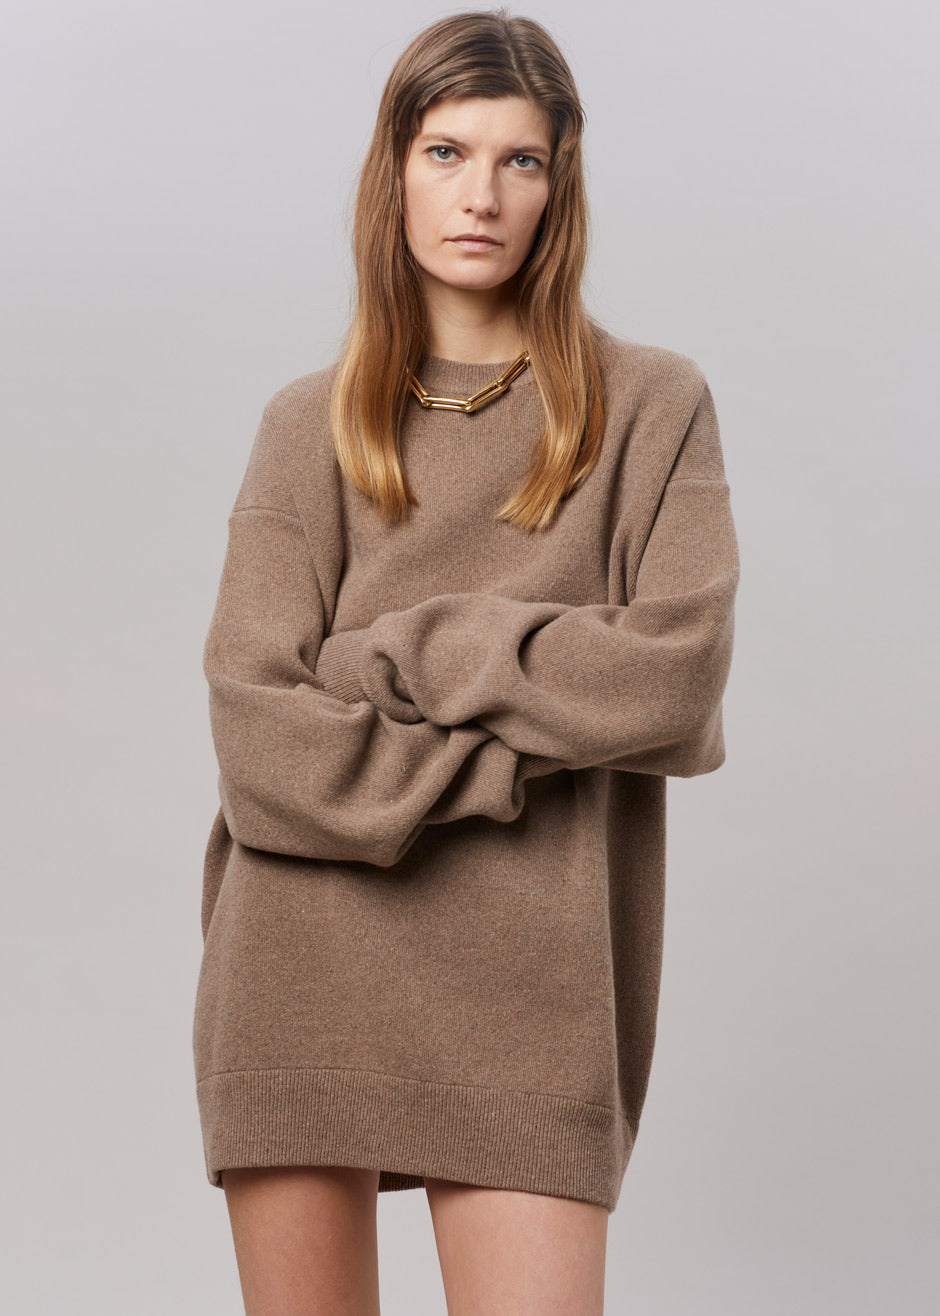 Hadrien Italian Recycled Cashmere Sweater - Taupe - 2